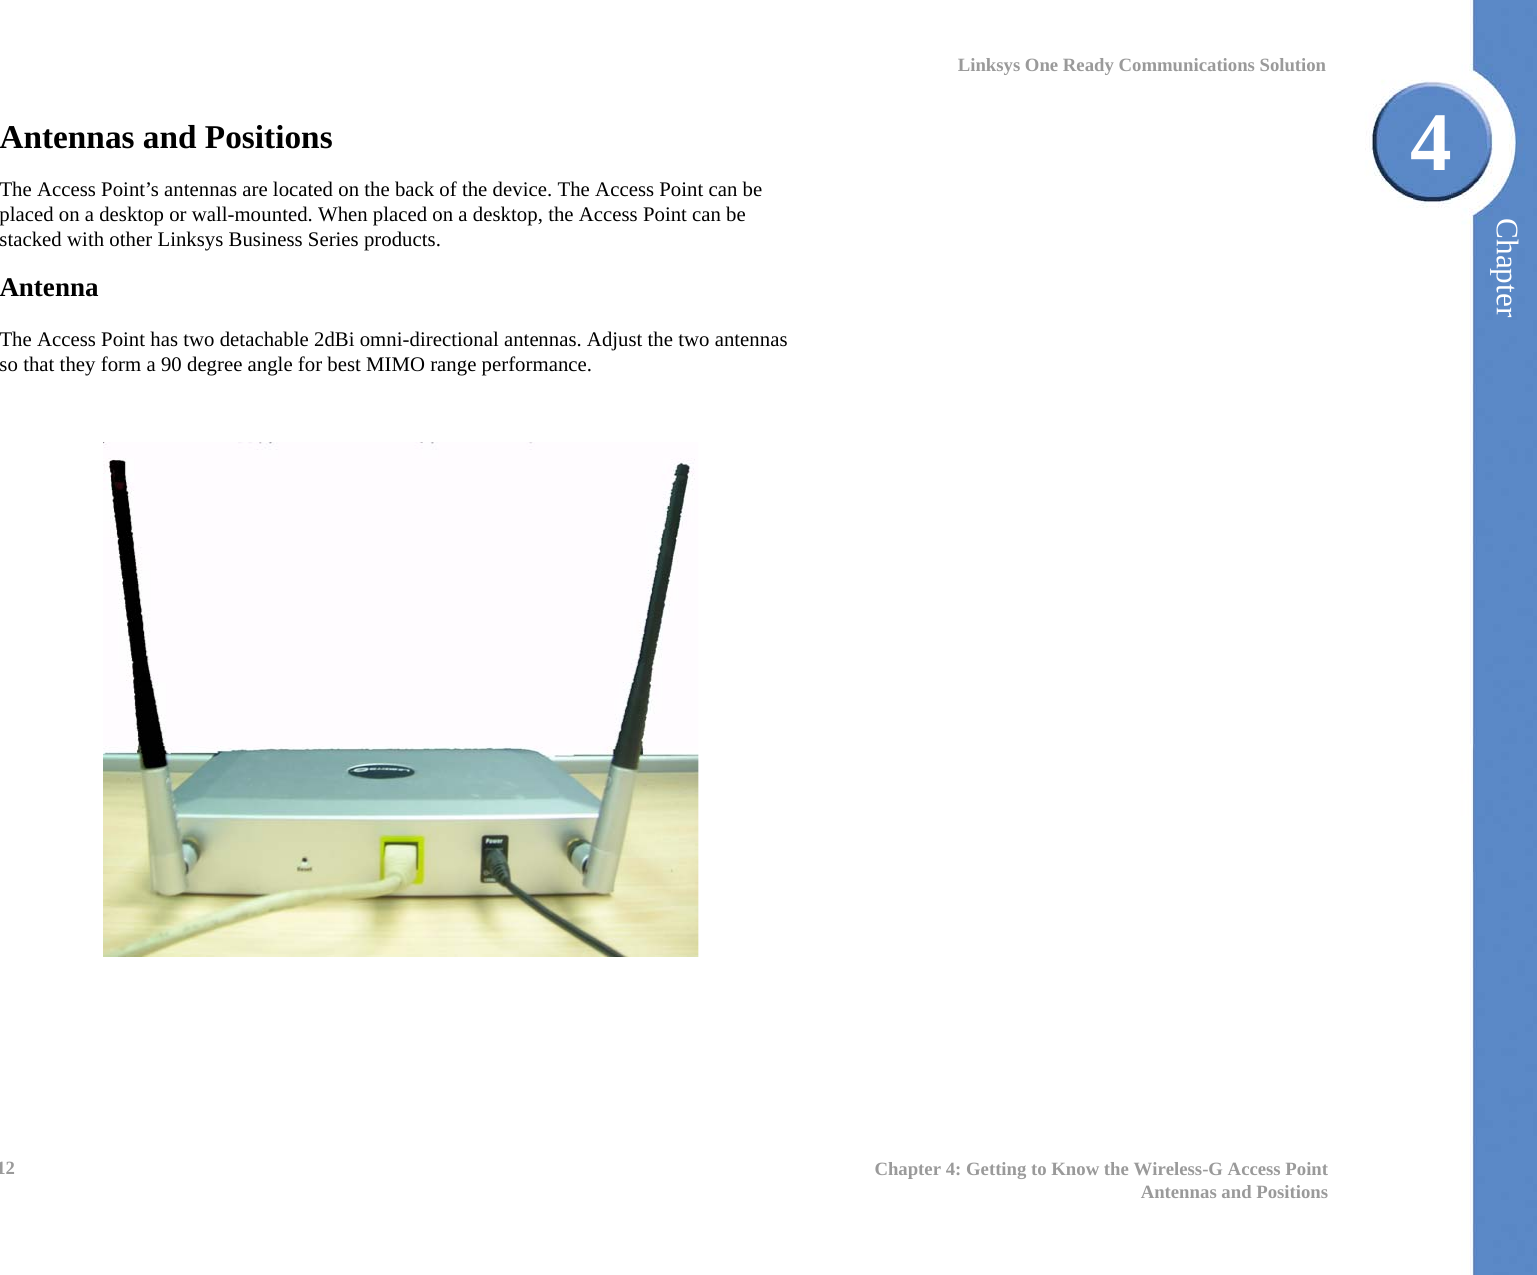 Chapter412 Chapter 4: Getting to Know the Wireless-G Access PointAntennas and PositionsLinksys One Ready Communications SolutionAntennas and Positions The Access Point’s antennas are located on the back of the device. The Access Point can be placed on a desktop or wall-mounted. When placed on a desktop, the Access Point can be stacked with other Linksys Business Series products.AntennaThe Access Point has two detachable 2dBi omni-directional antennas. Adjust the two antennas so that they form a 90 degree angle for best MIMO range performance. 